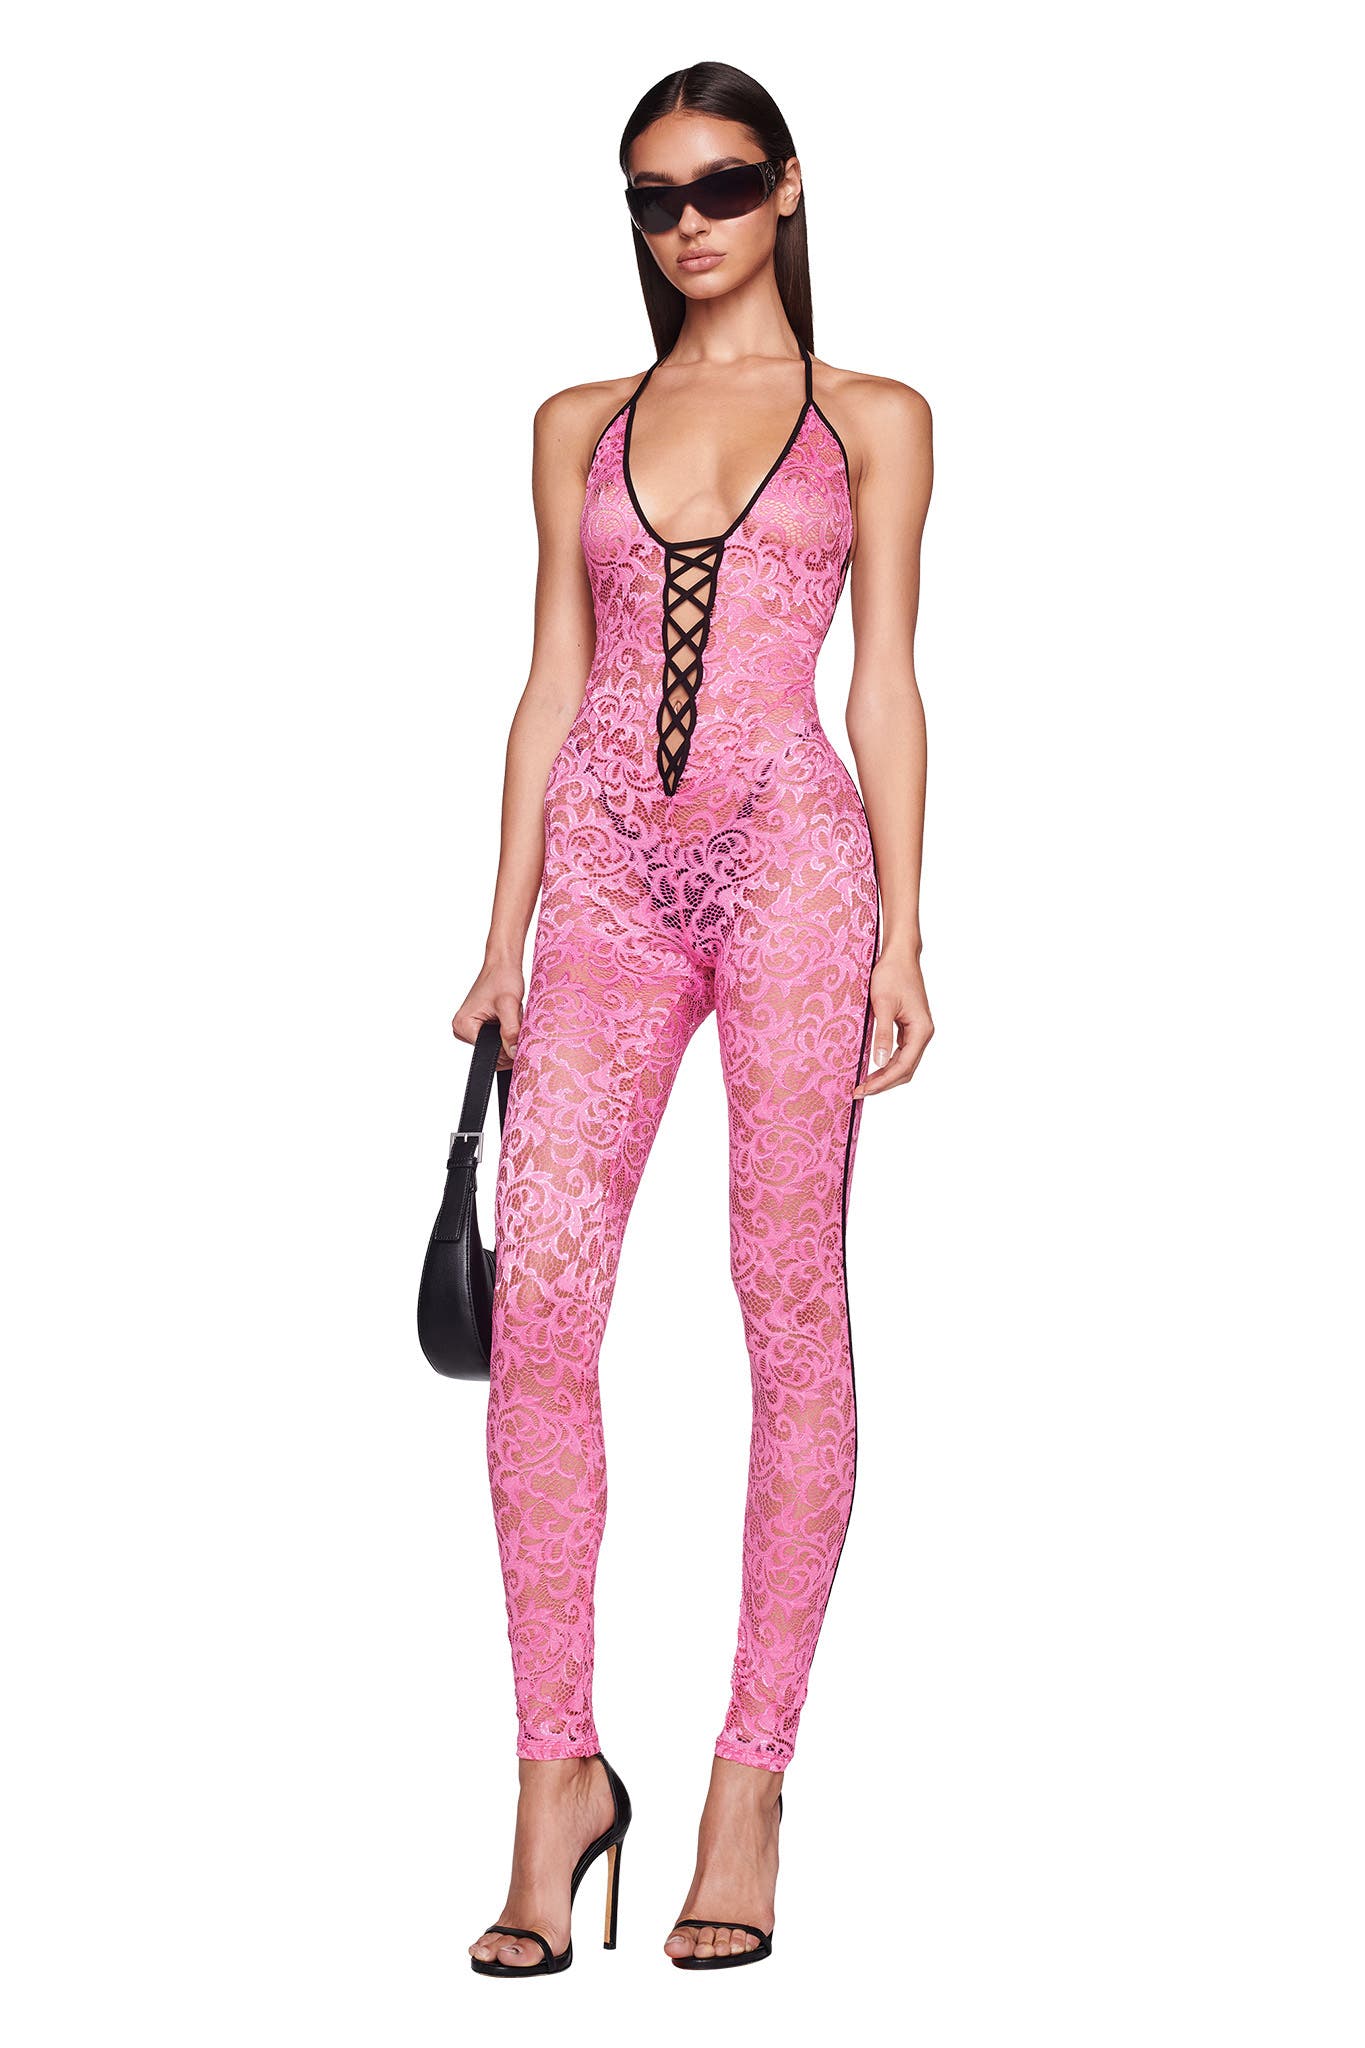 SABLE CATSUIT - PINK : HOT PINK